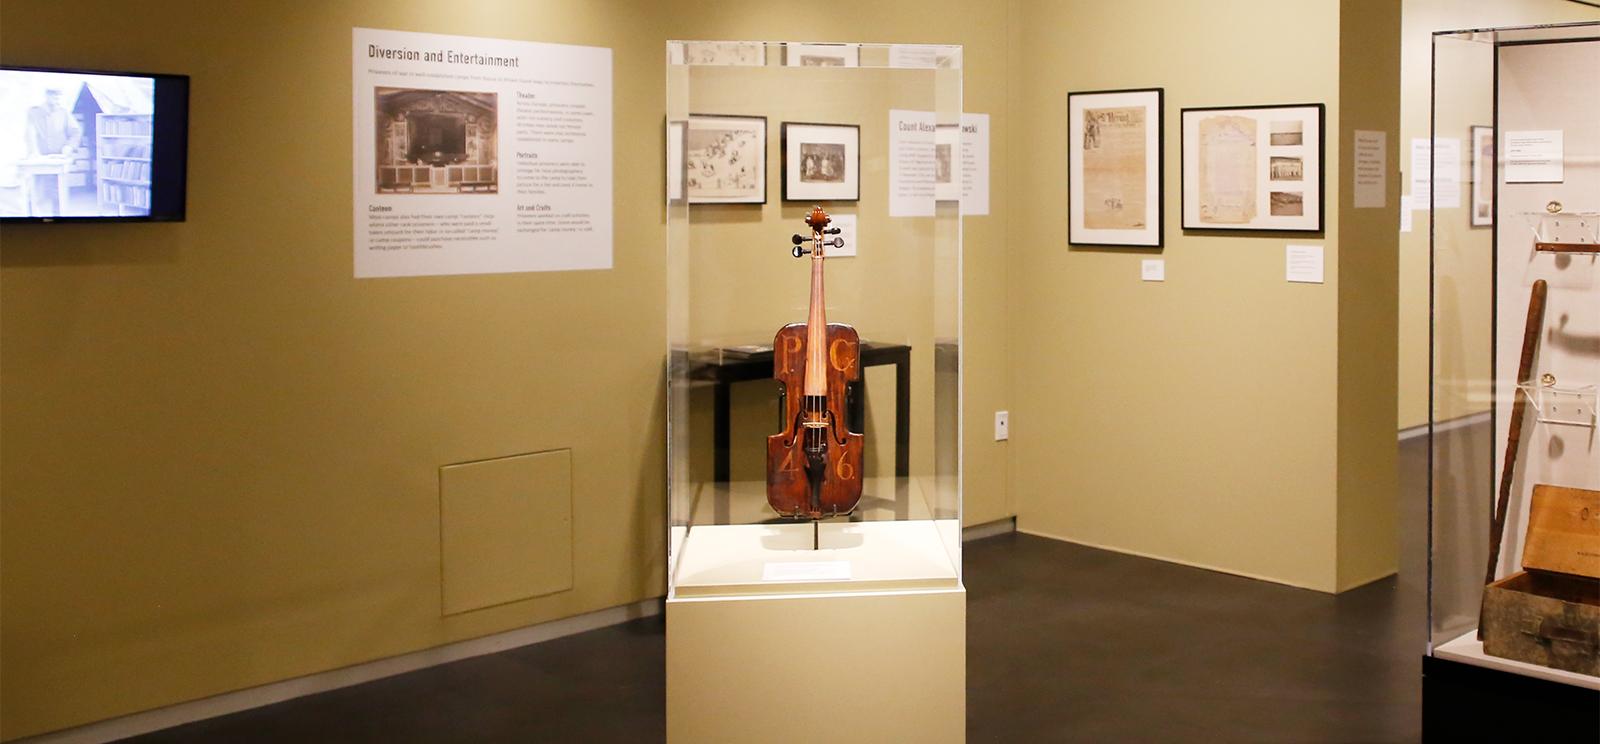 Modern photograph of a handmade violin in a clear exhibit case